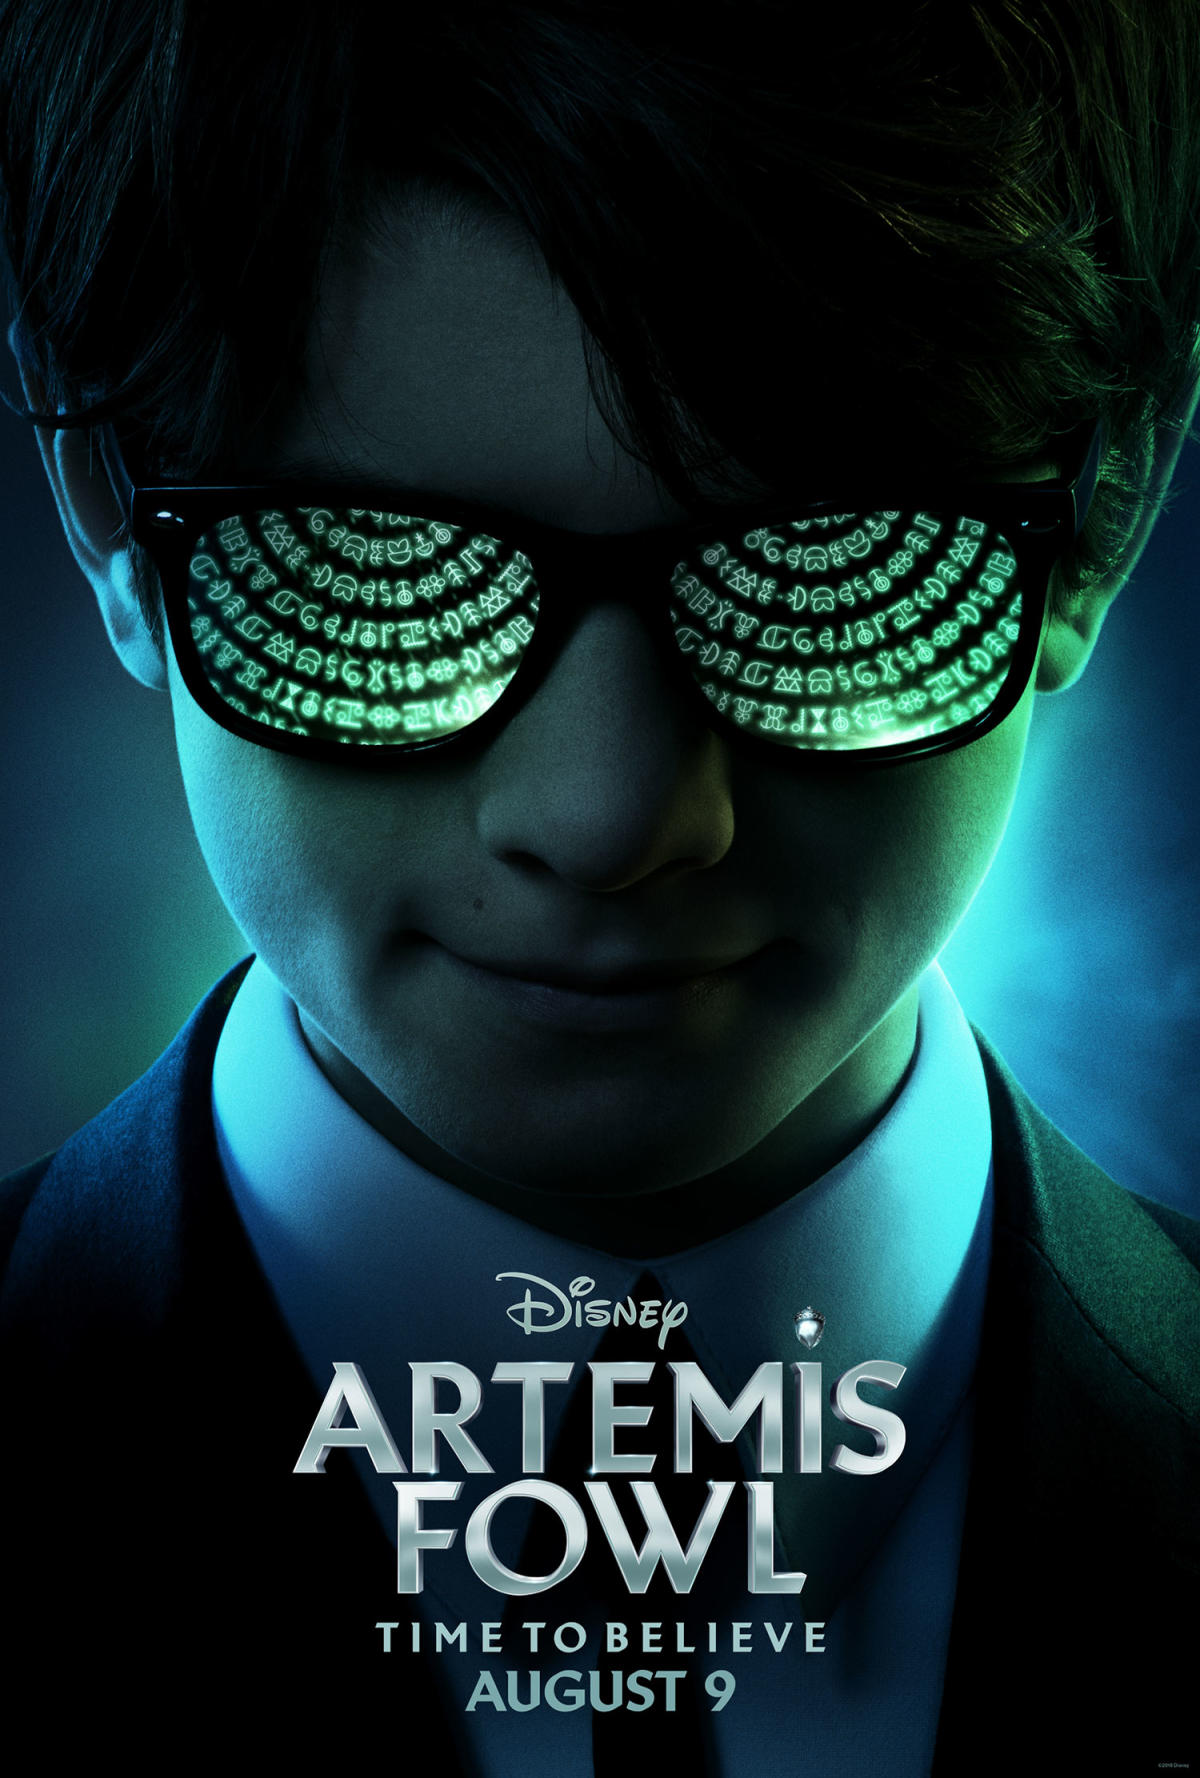 What Happened to 'Artemis Fowl'?